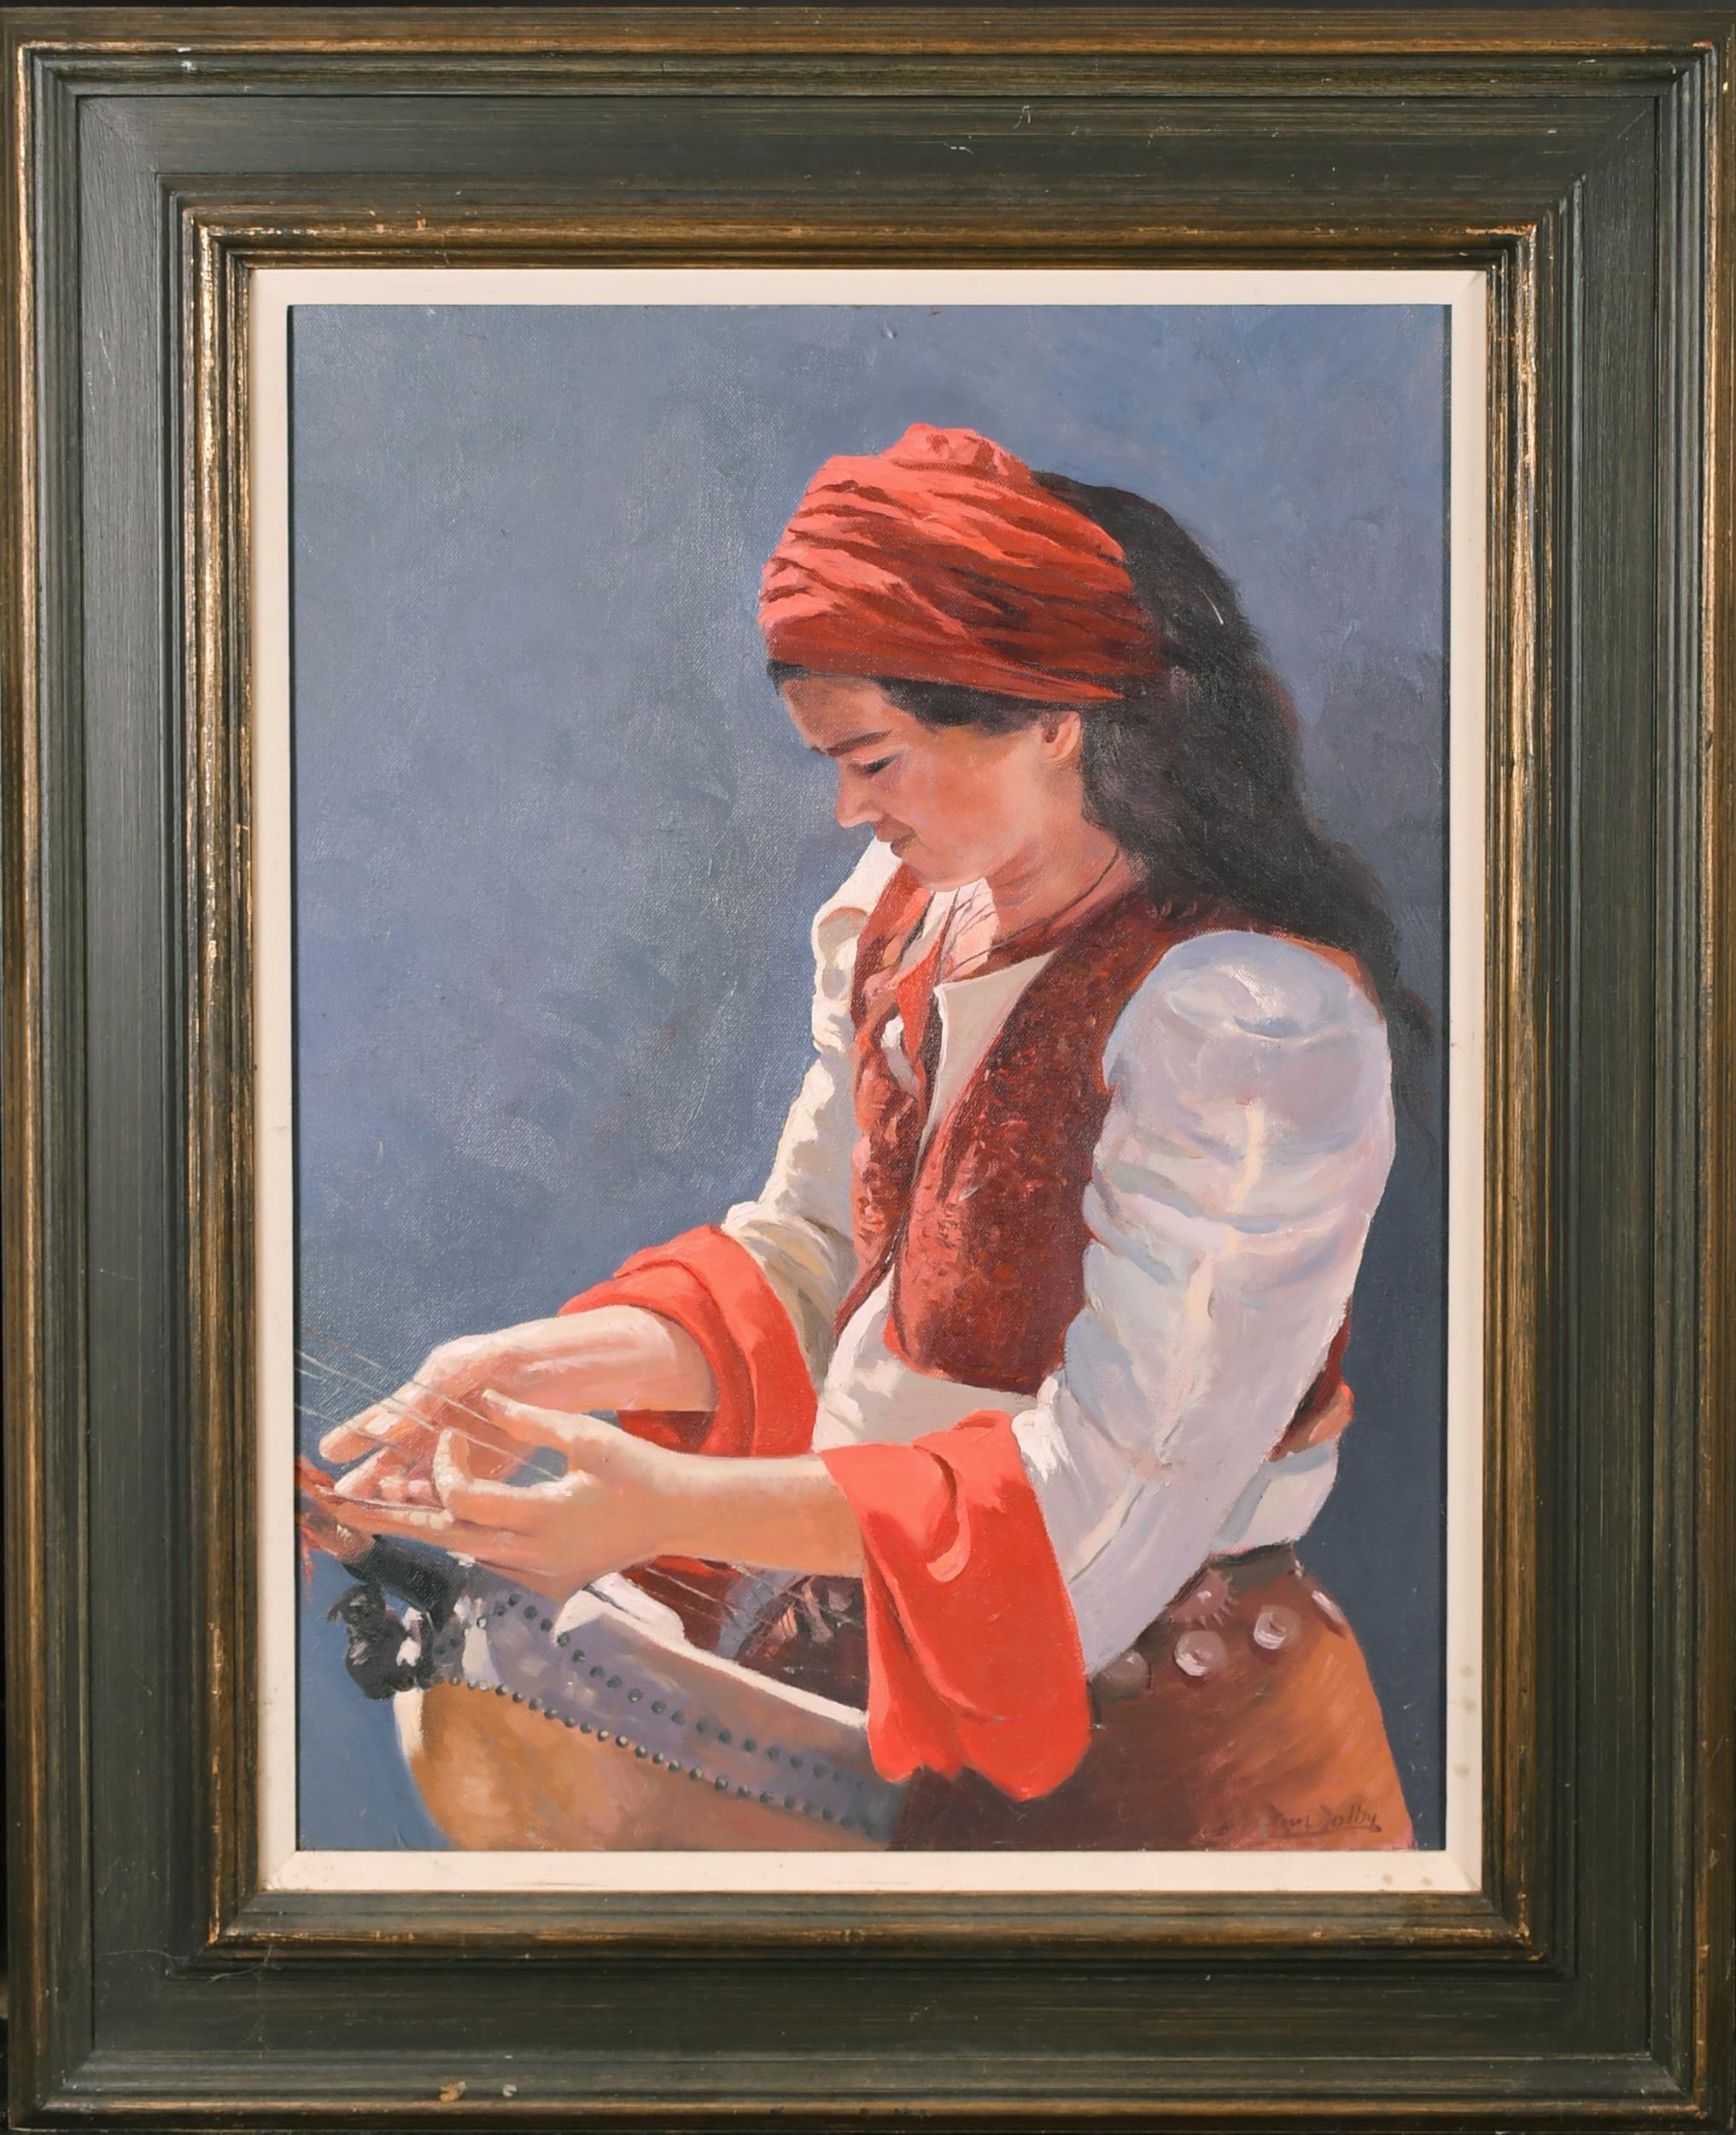 Tim Dolby Portrait Painting - The Lute Player - Large 20th Century Music Musical Portrait Oil Canvas Painting